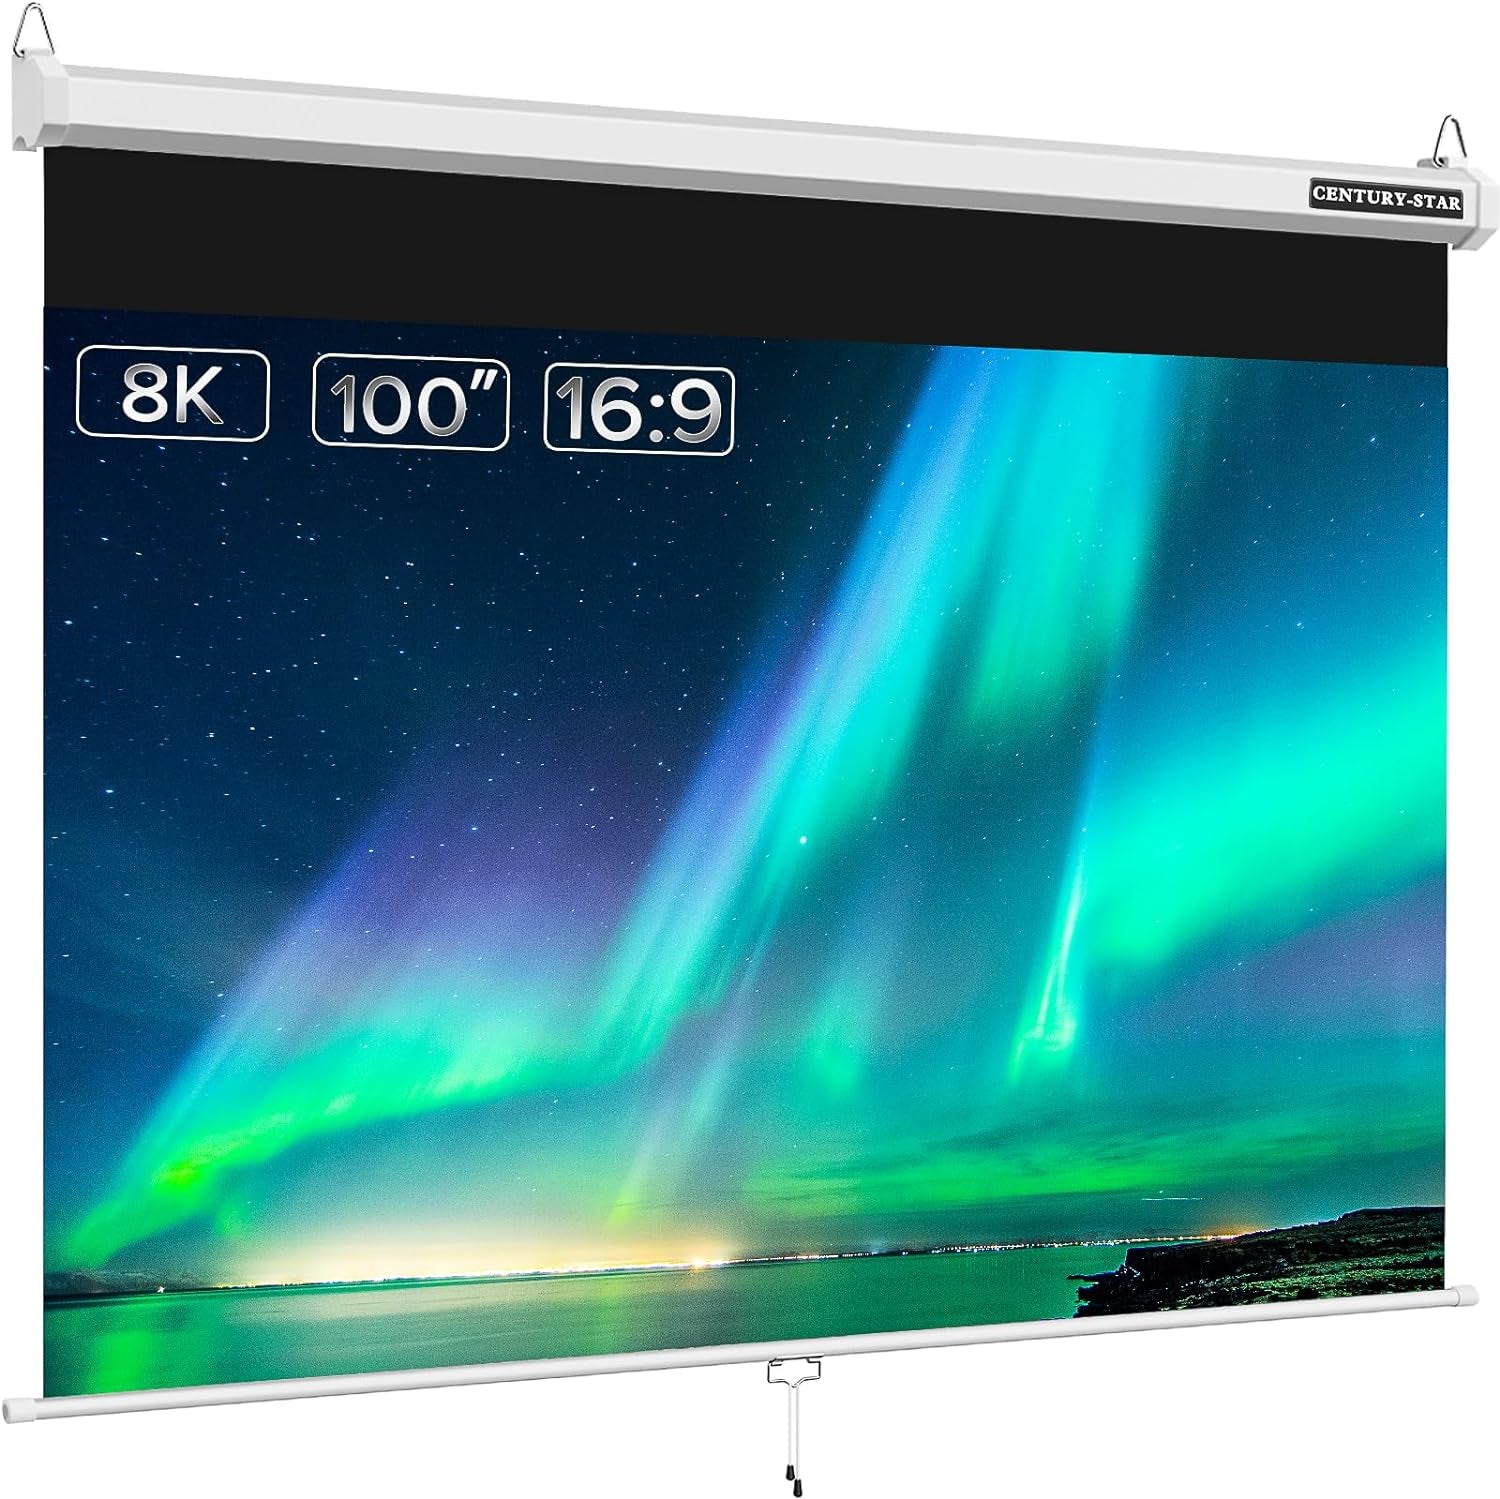 100 Inch Projector Screen Pull Down, 3 Layers PVC Auto-Locking Manual Pull down Projector Screen Retractable, 16:9 Portable Projector Screen Indoor Outdoor - Home Theater Office Education